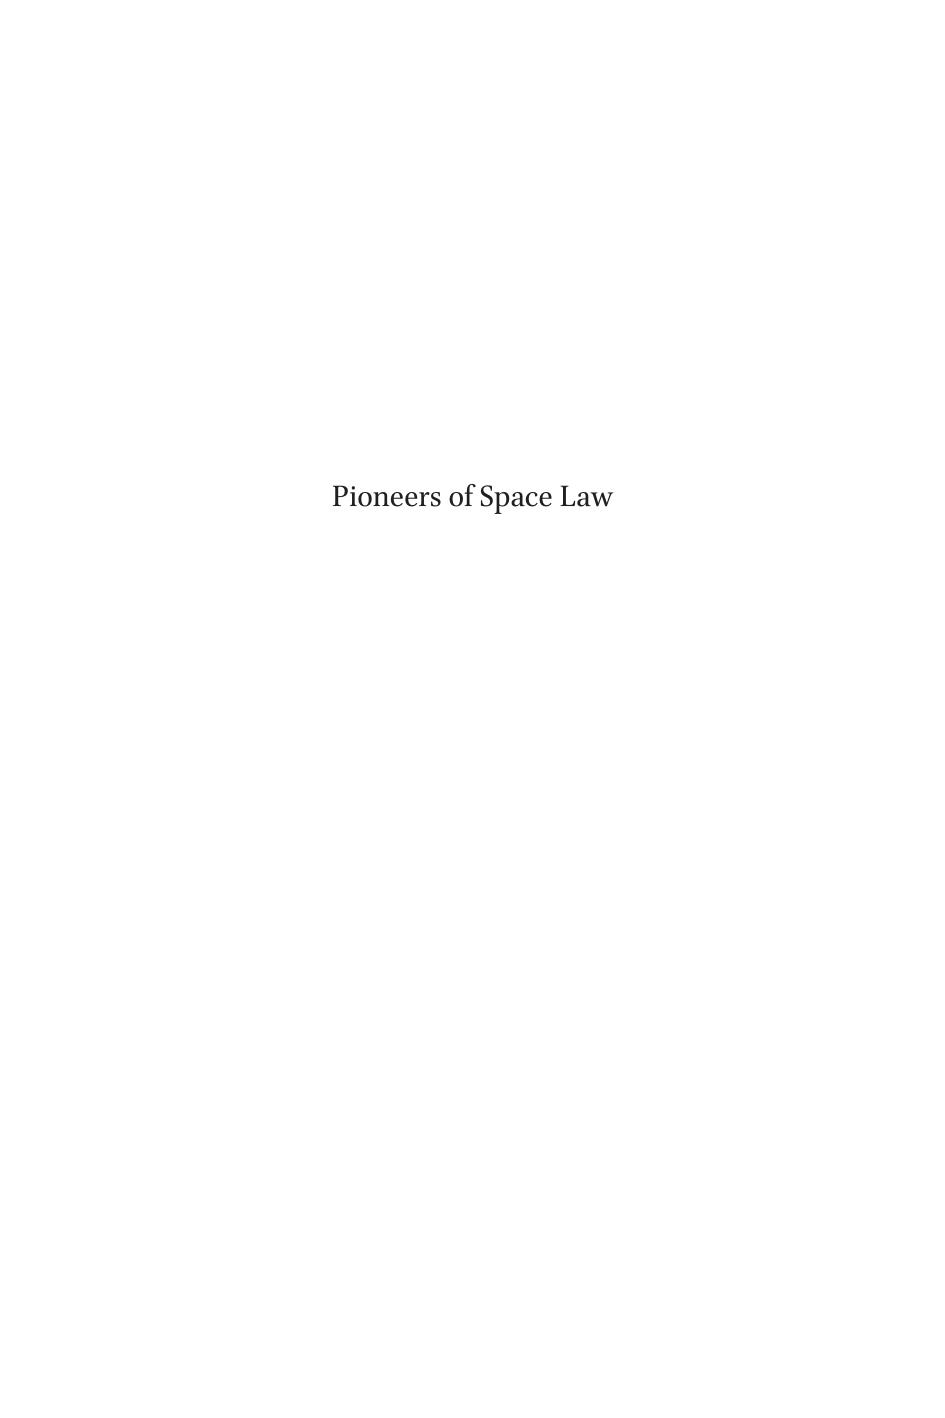 Pioneers of Space Law : A Publication of the International Institute of Space Law by Stephan Hobe